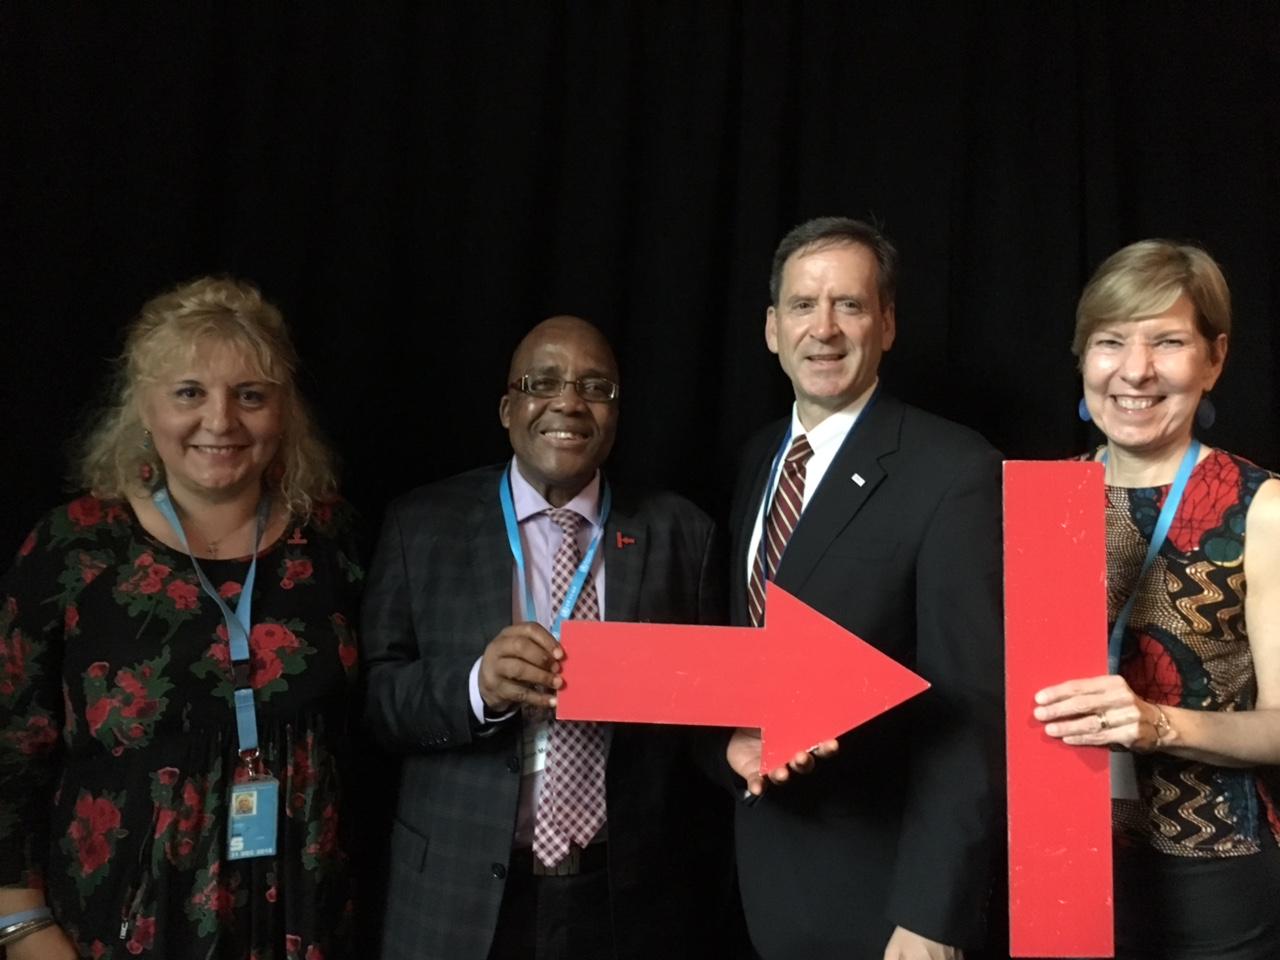  Stop TB Partnership Executive Director Dr. Lucica Ditiu; South Africa Minister of Health and Stop TB Coordinating Chair Dr. Aaron Motsoaledi; USAID Administrator Mark Green; and RESULTS Executive Director and Stop TB Coordinating Board Vice Chair Joanne Carter.